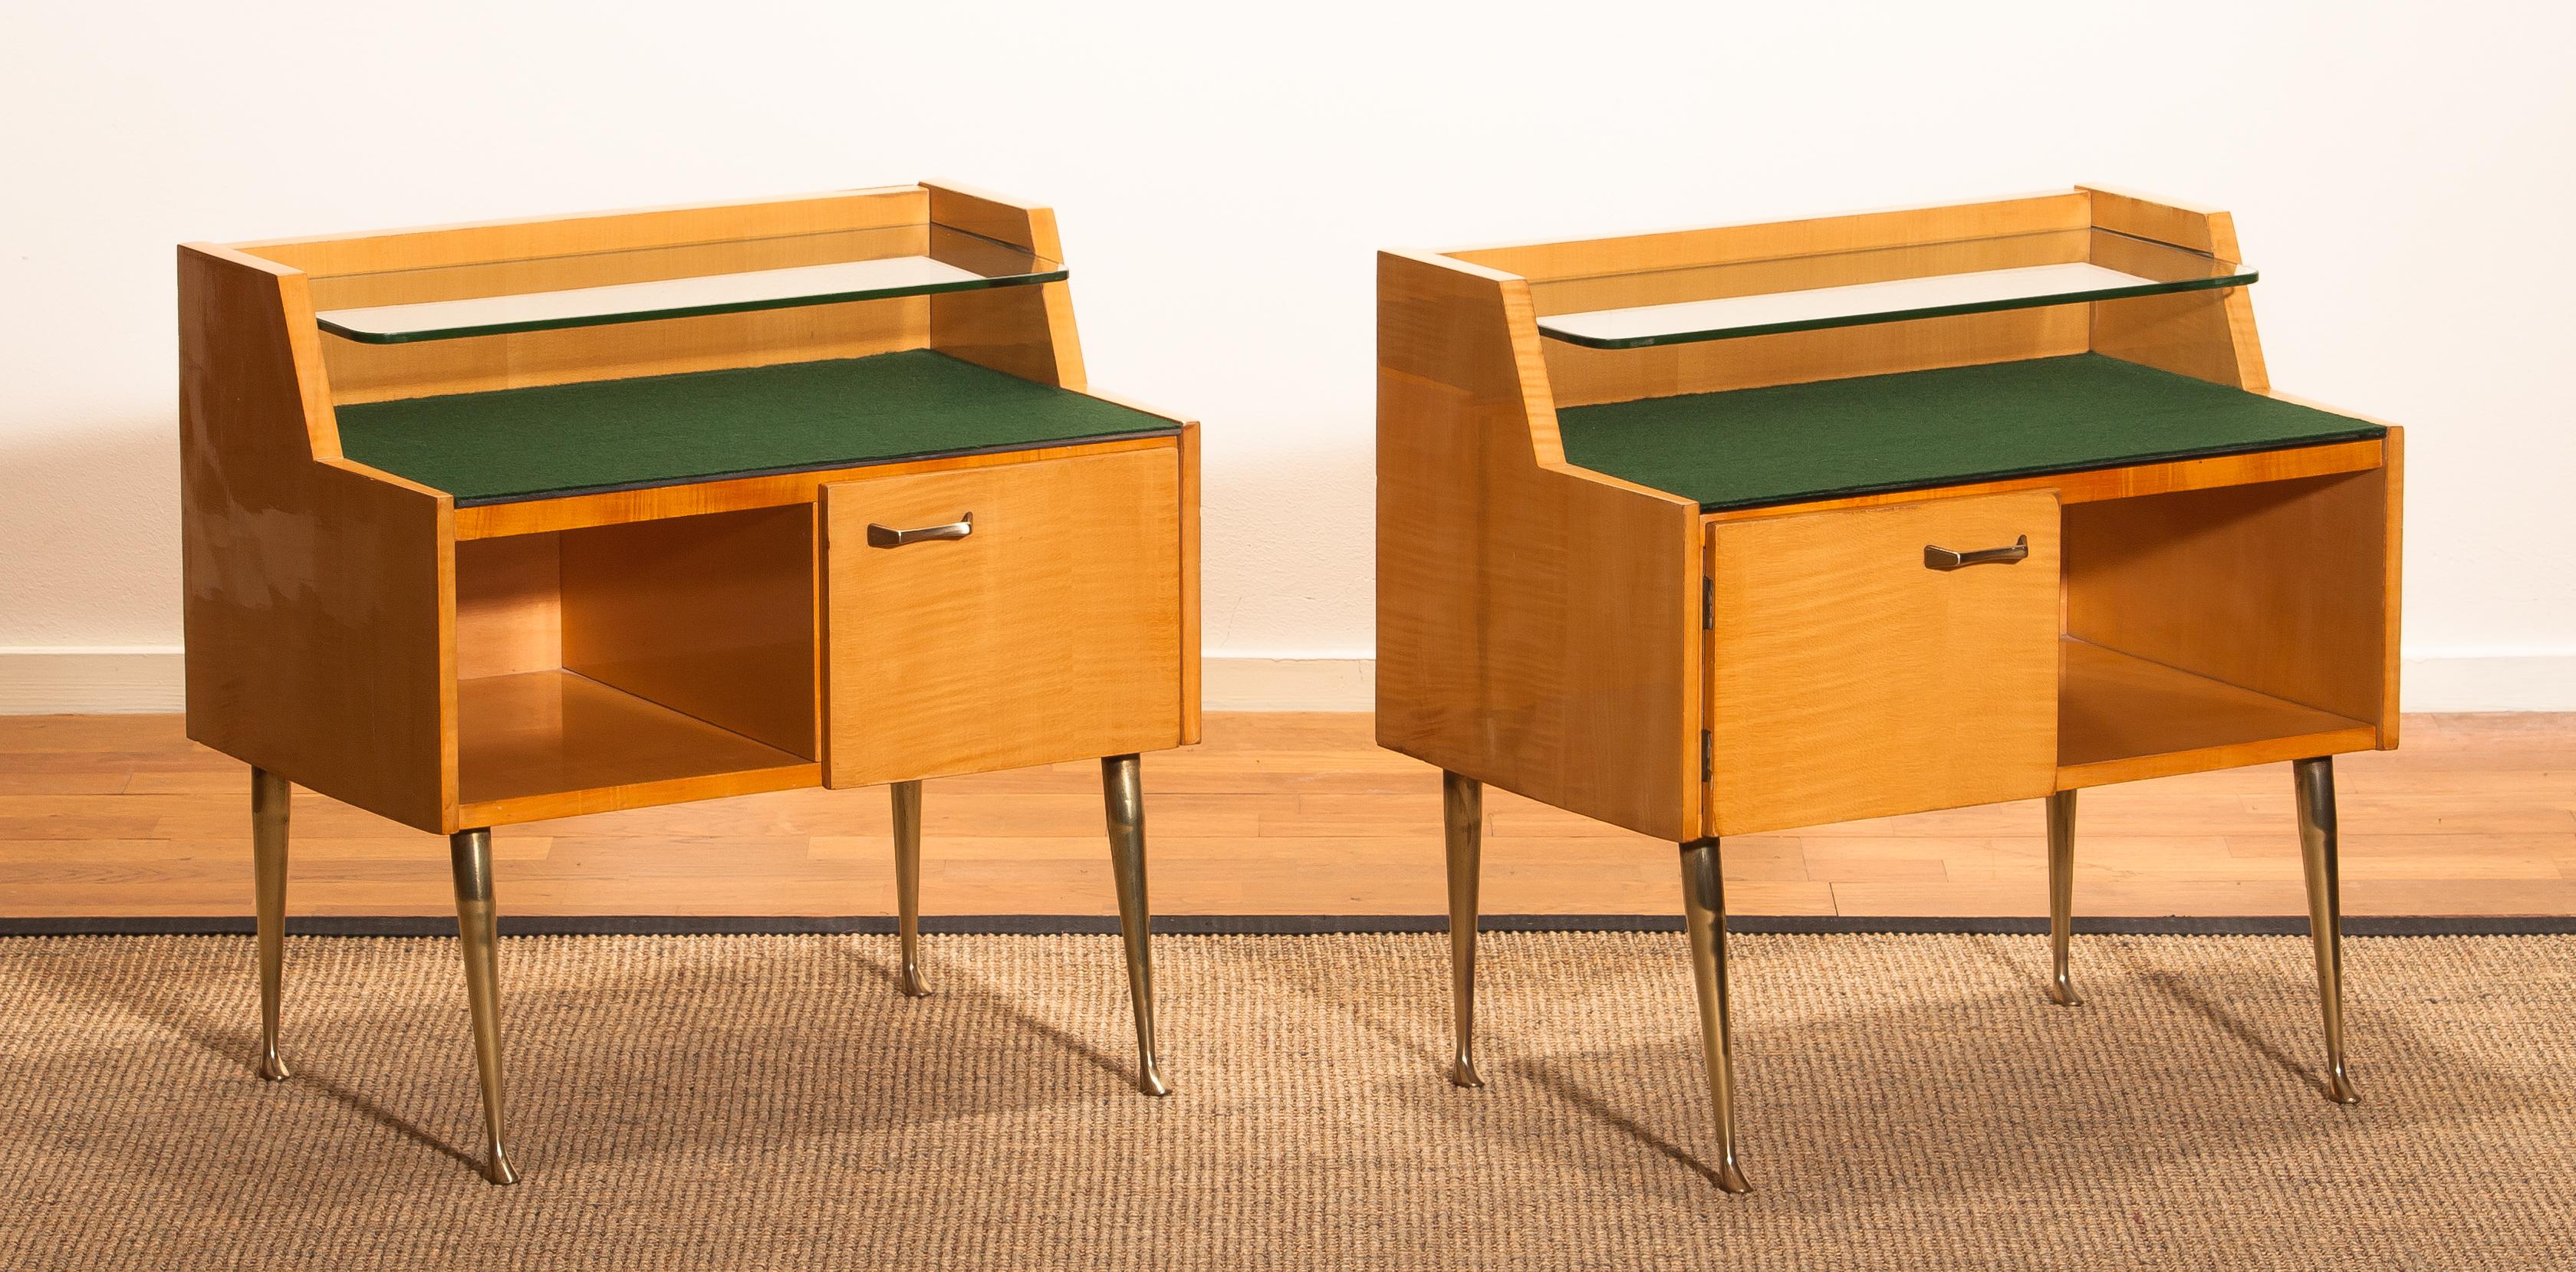 Beautiful set of two Italian midcentury bedside tables in maple with brass legs and brass handle designed by Paolo Buffa, Italy, 1950s.
Both are in good condition.
The top is covered with green felt and In addition, there's a smaller glass shelf